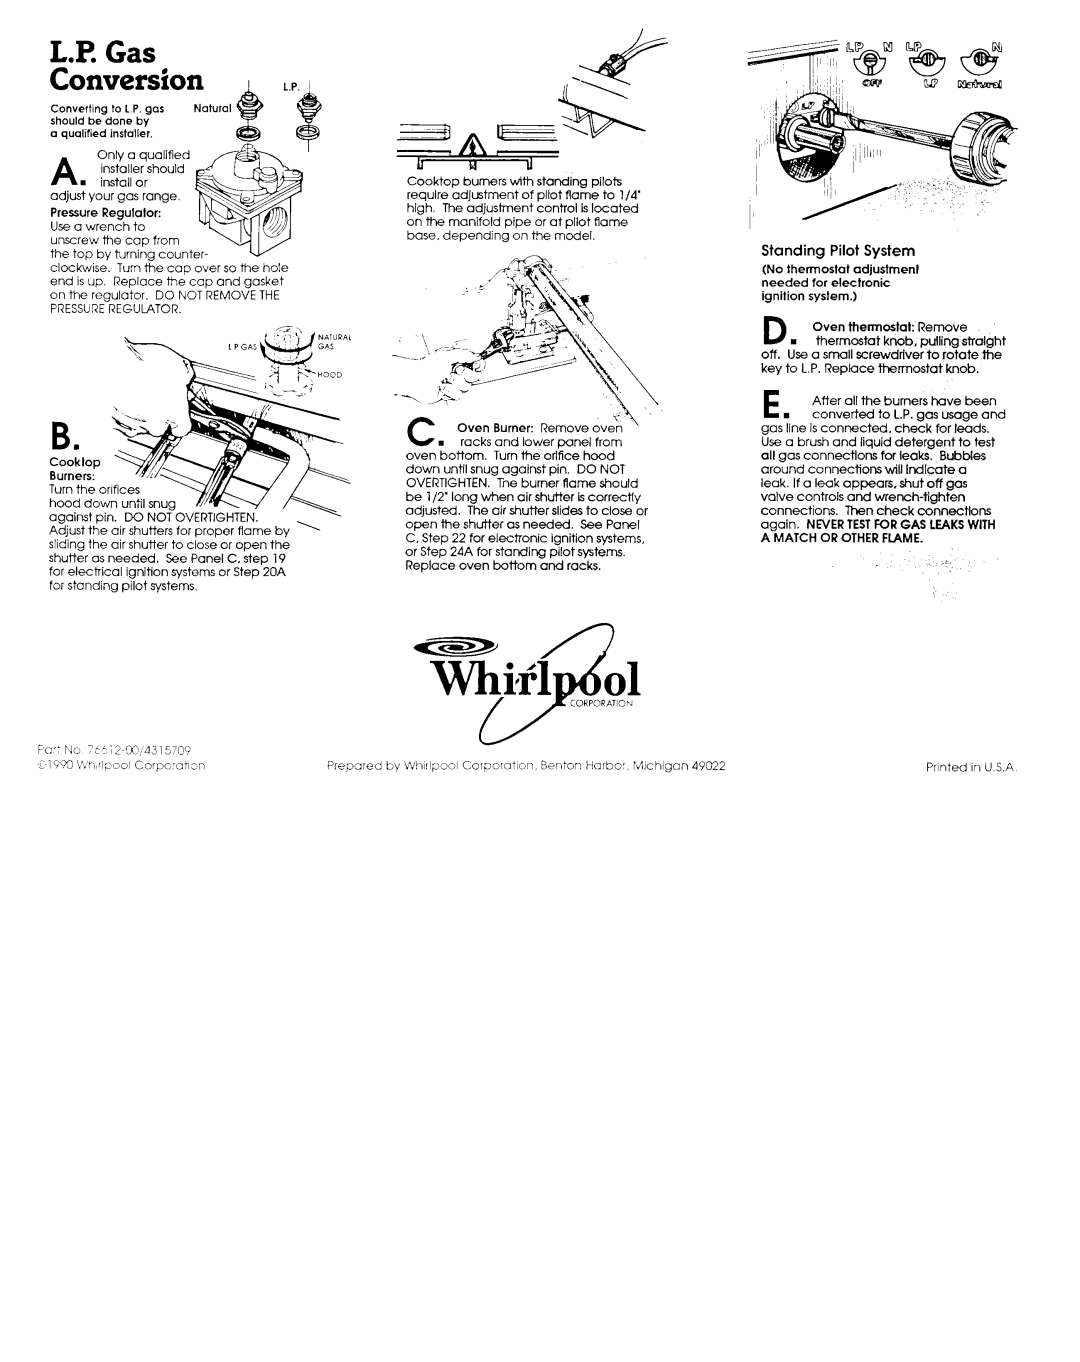 Whirlpool 76612-0014315709 installation instructions Conversion, Standing Pilot System 